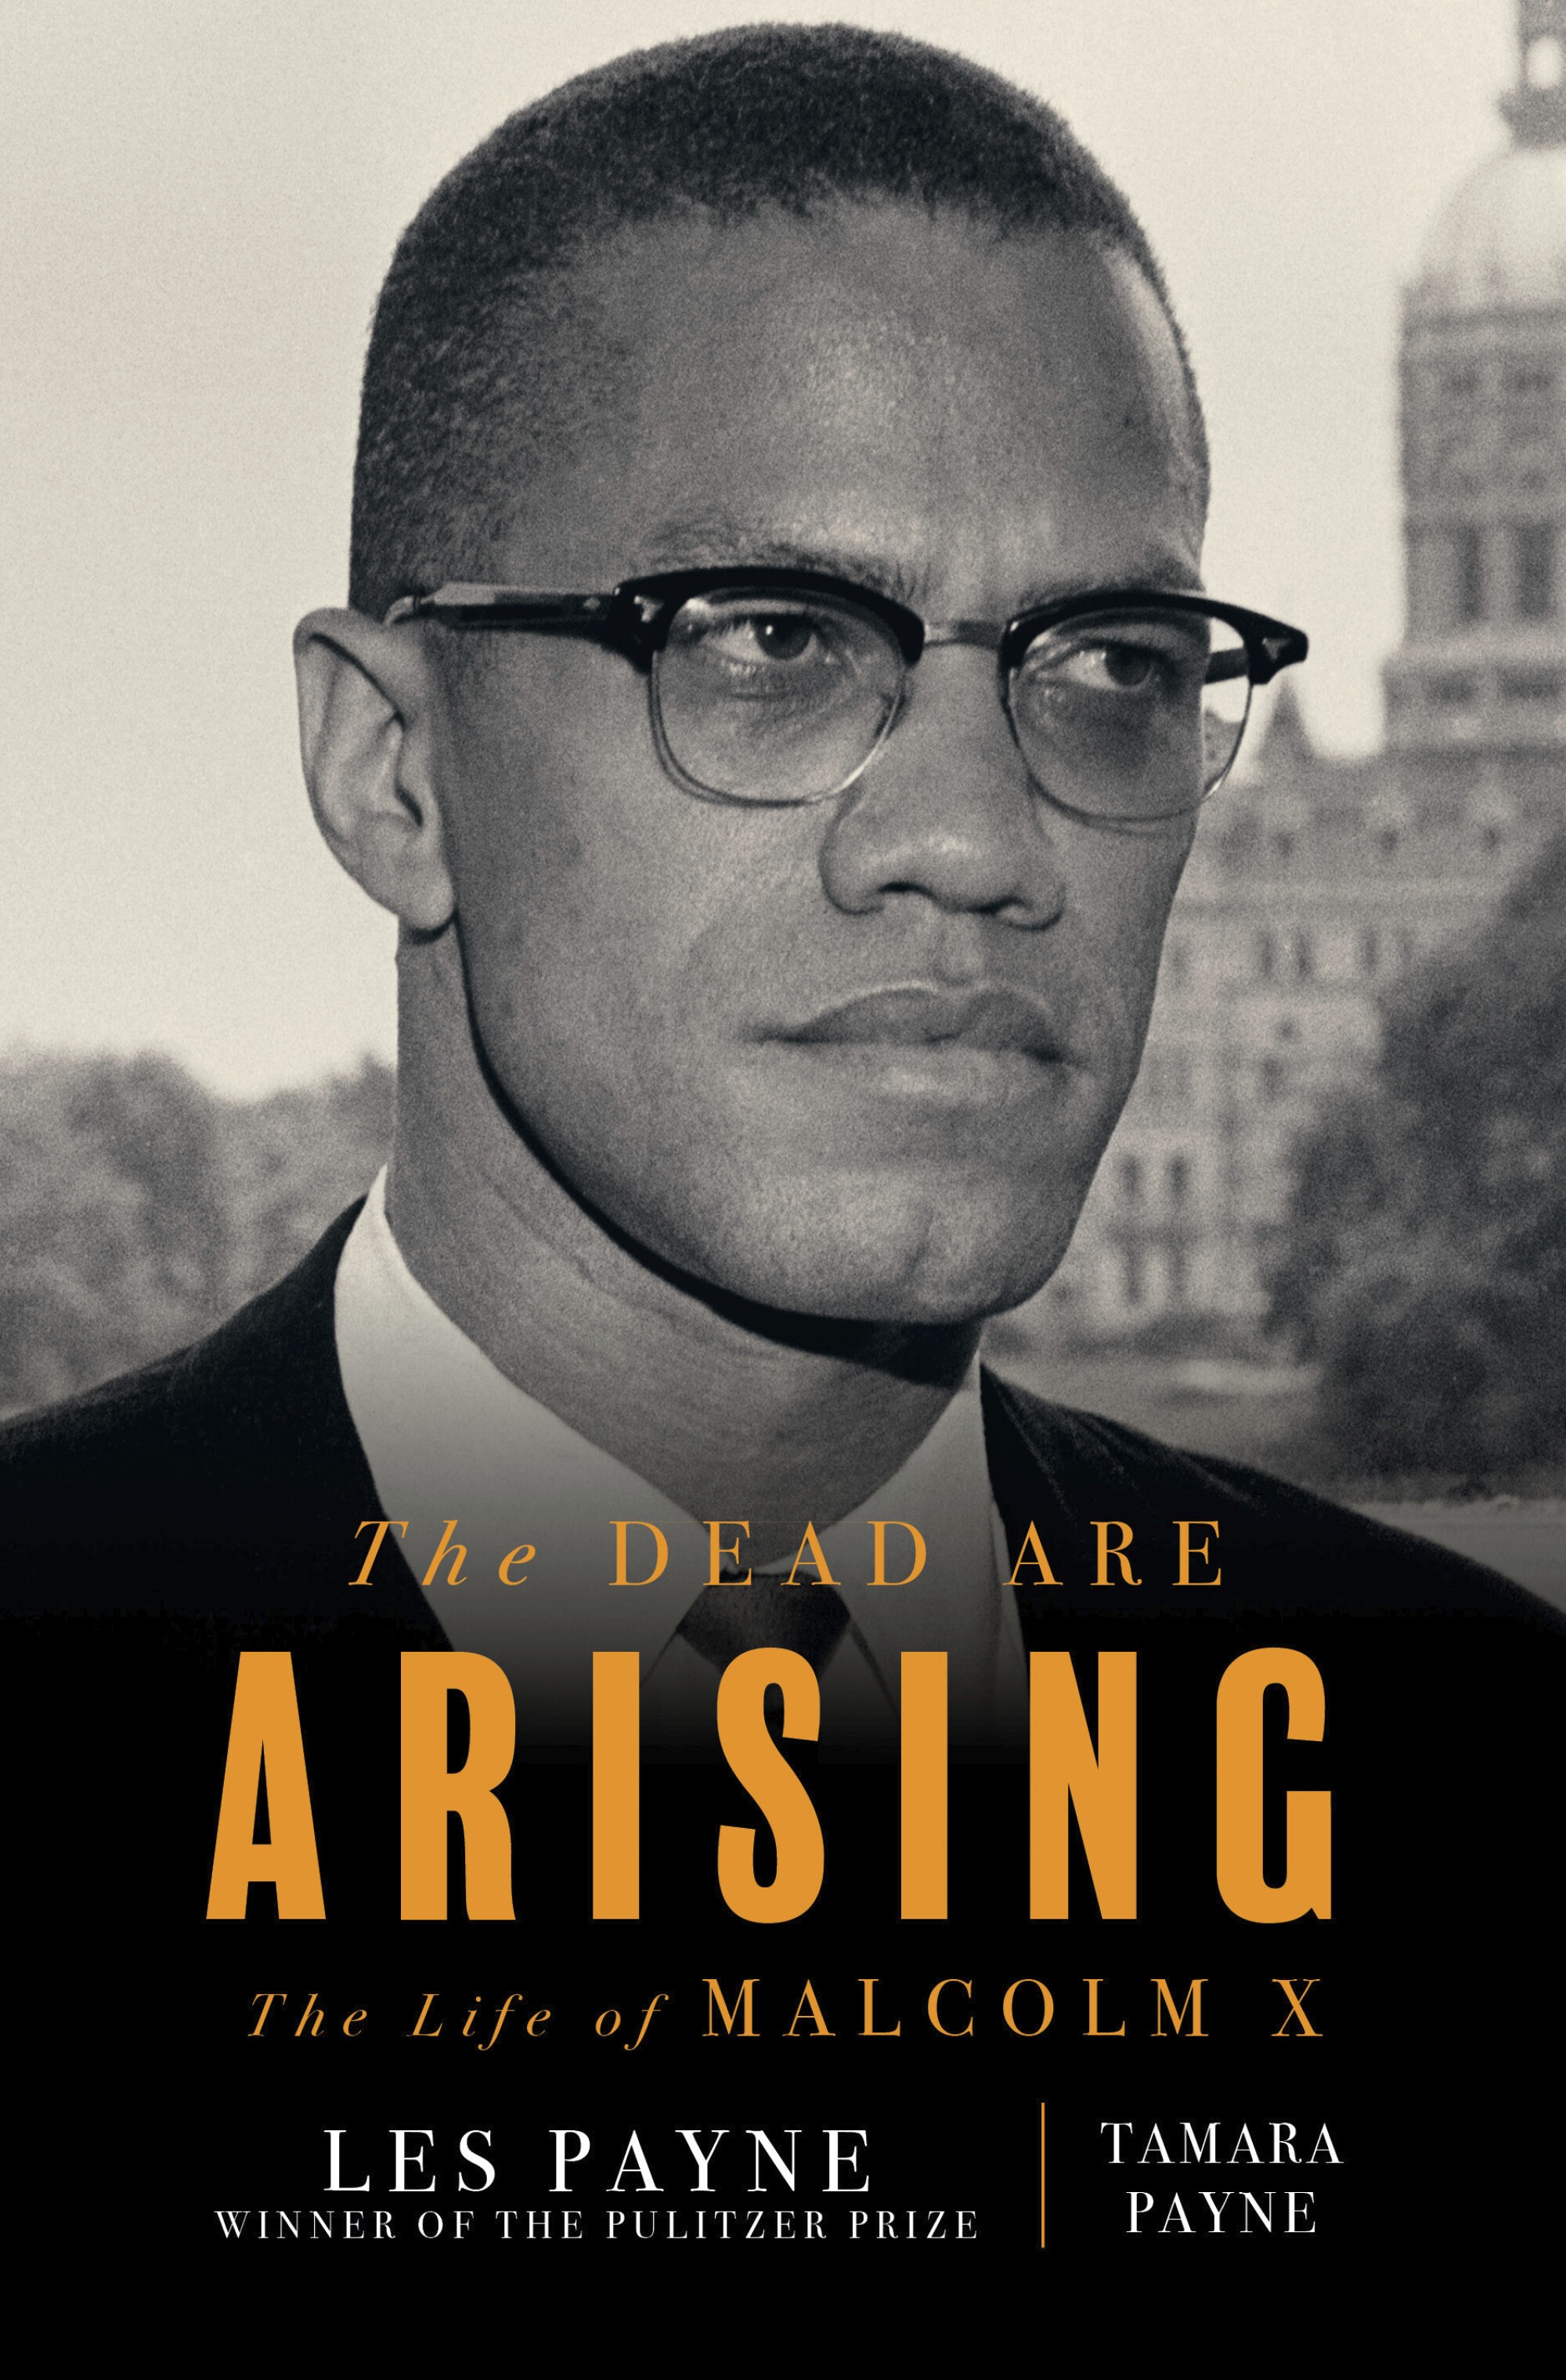 Malcolm X pictured on the cover of 